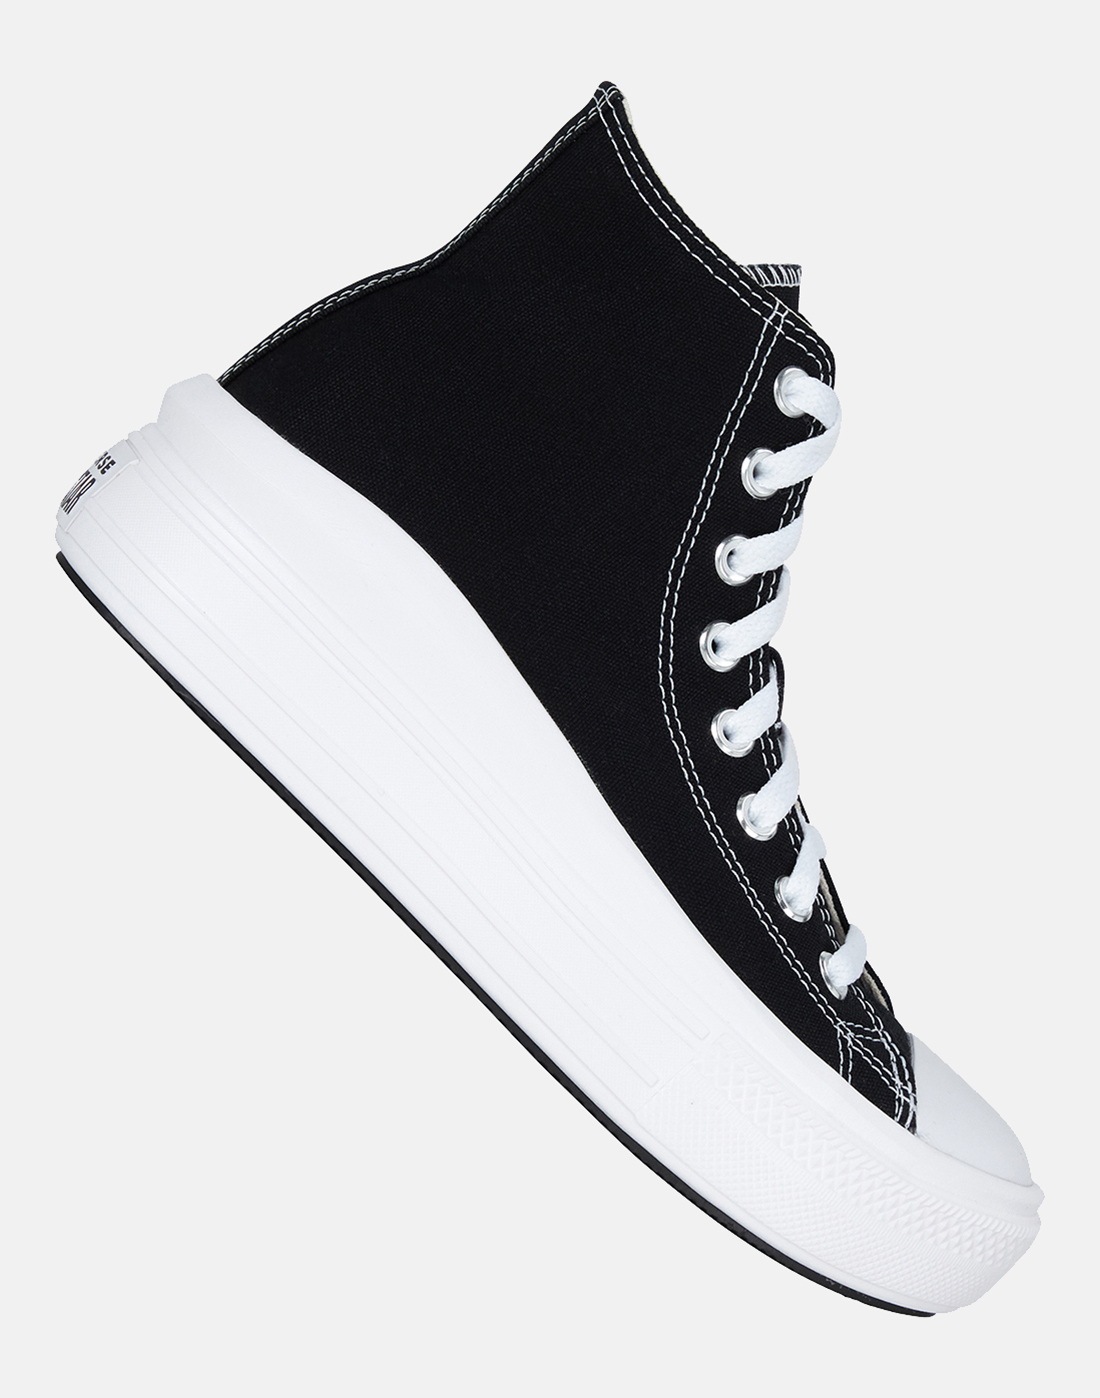 Converse Womens Chuck Taylor All Star Move HI - Black | Life Style Sports IE